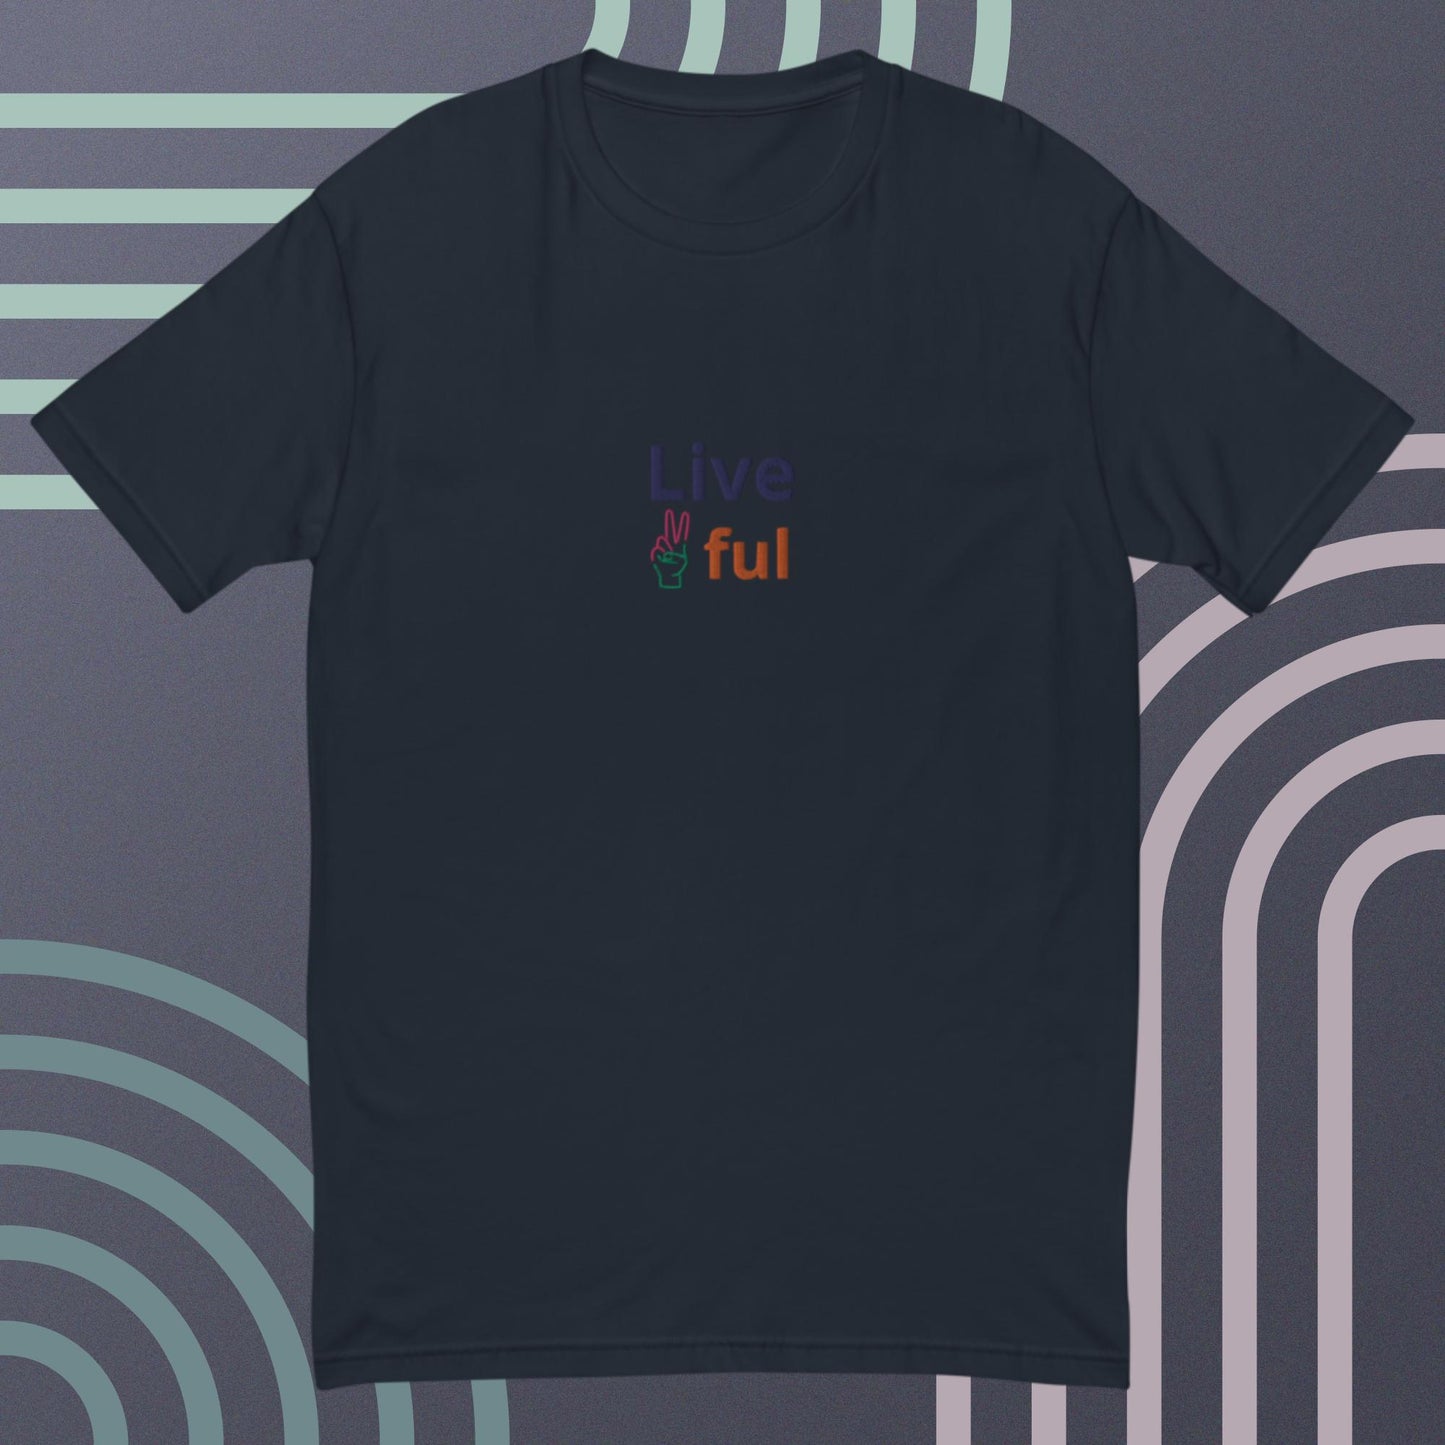 Multicolored "Live ✌️ful" T-Shirt